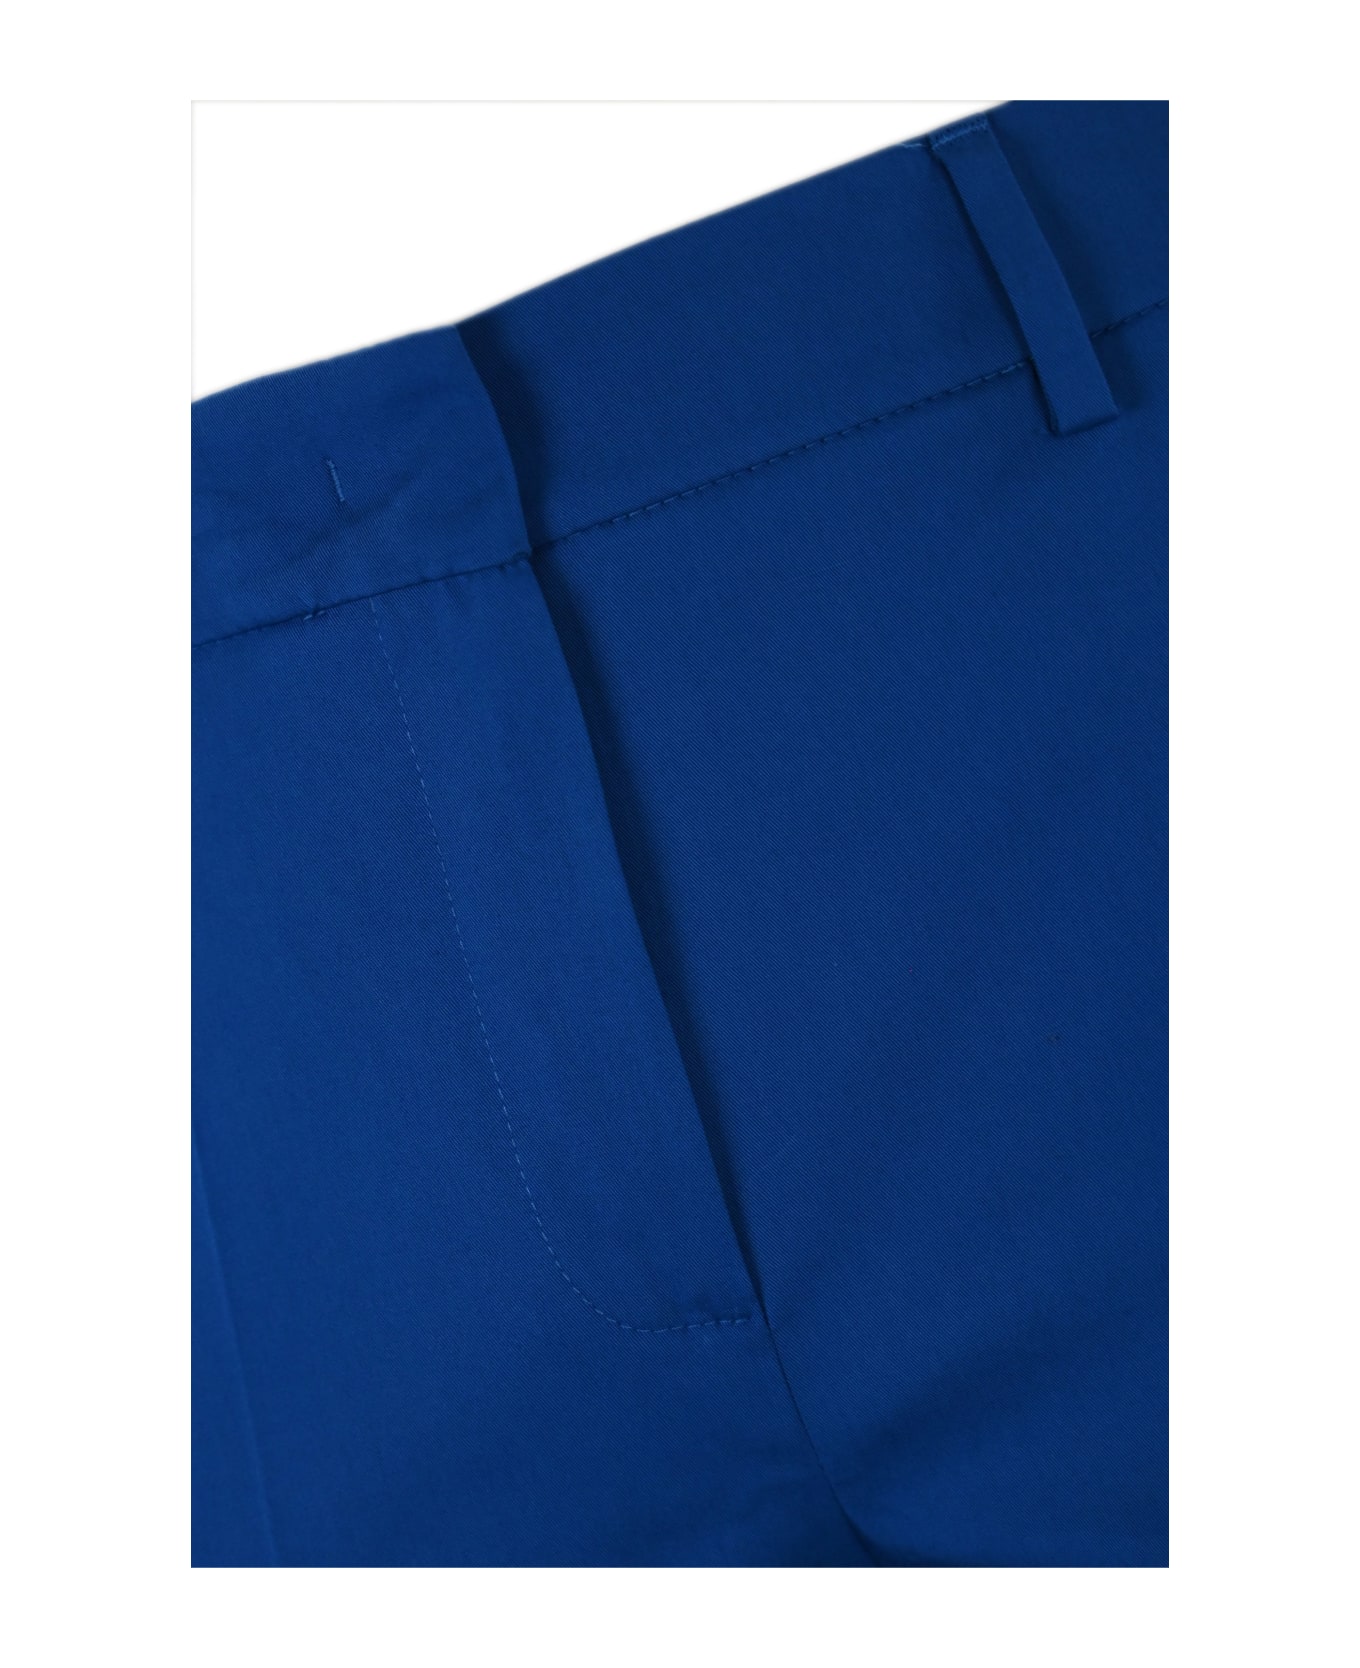 Weekend Max Mara 'cecco' Stretch Cotton Trousers - Oltremare